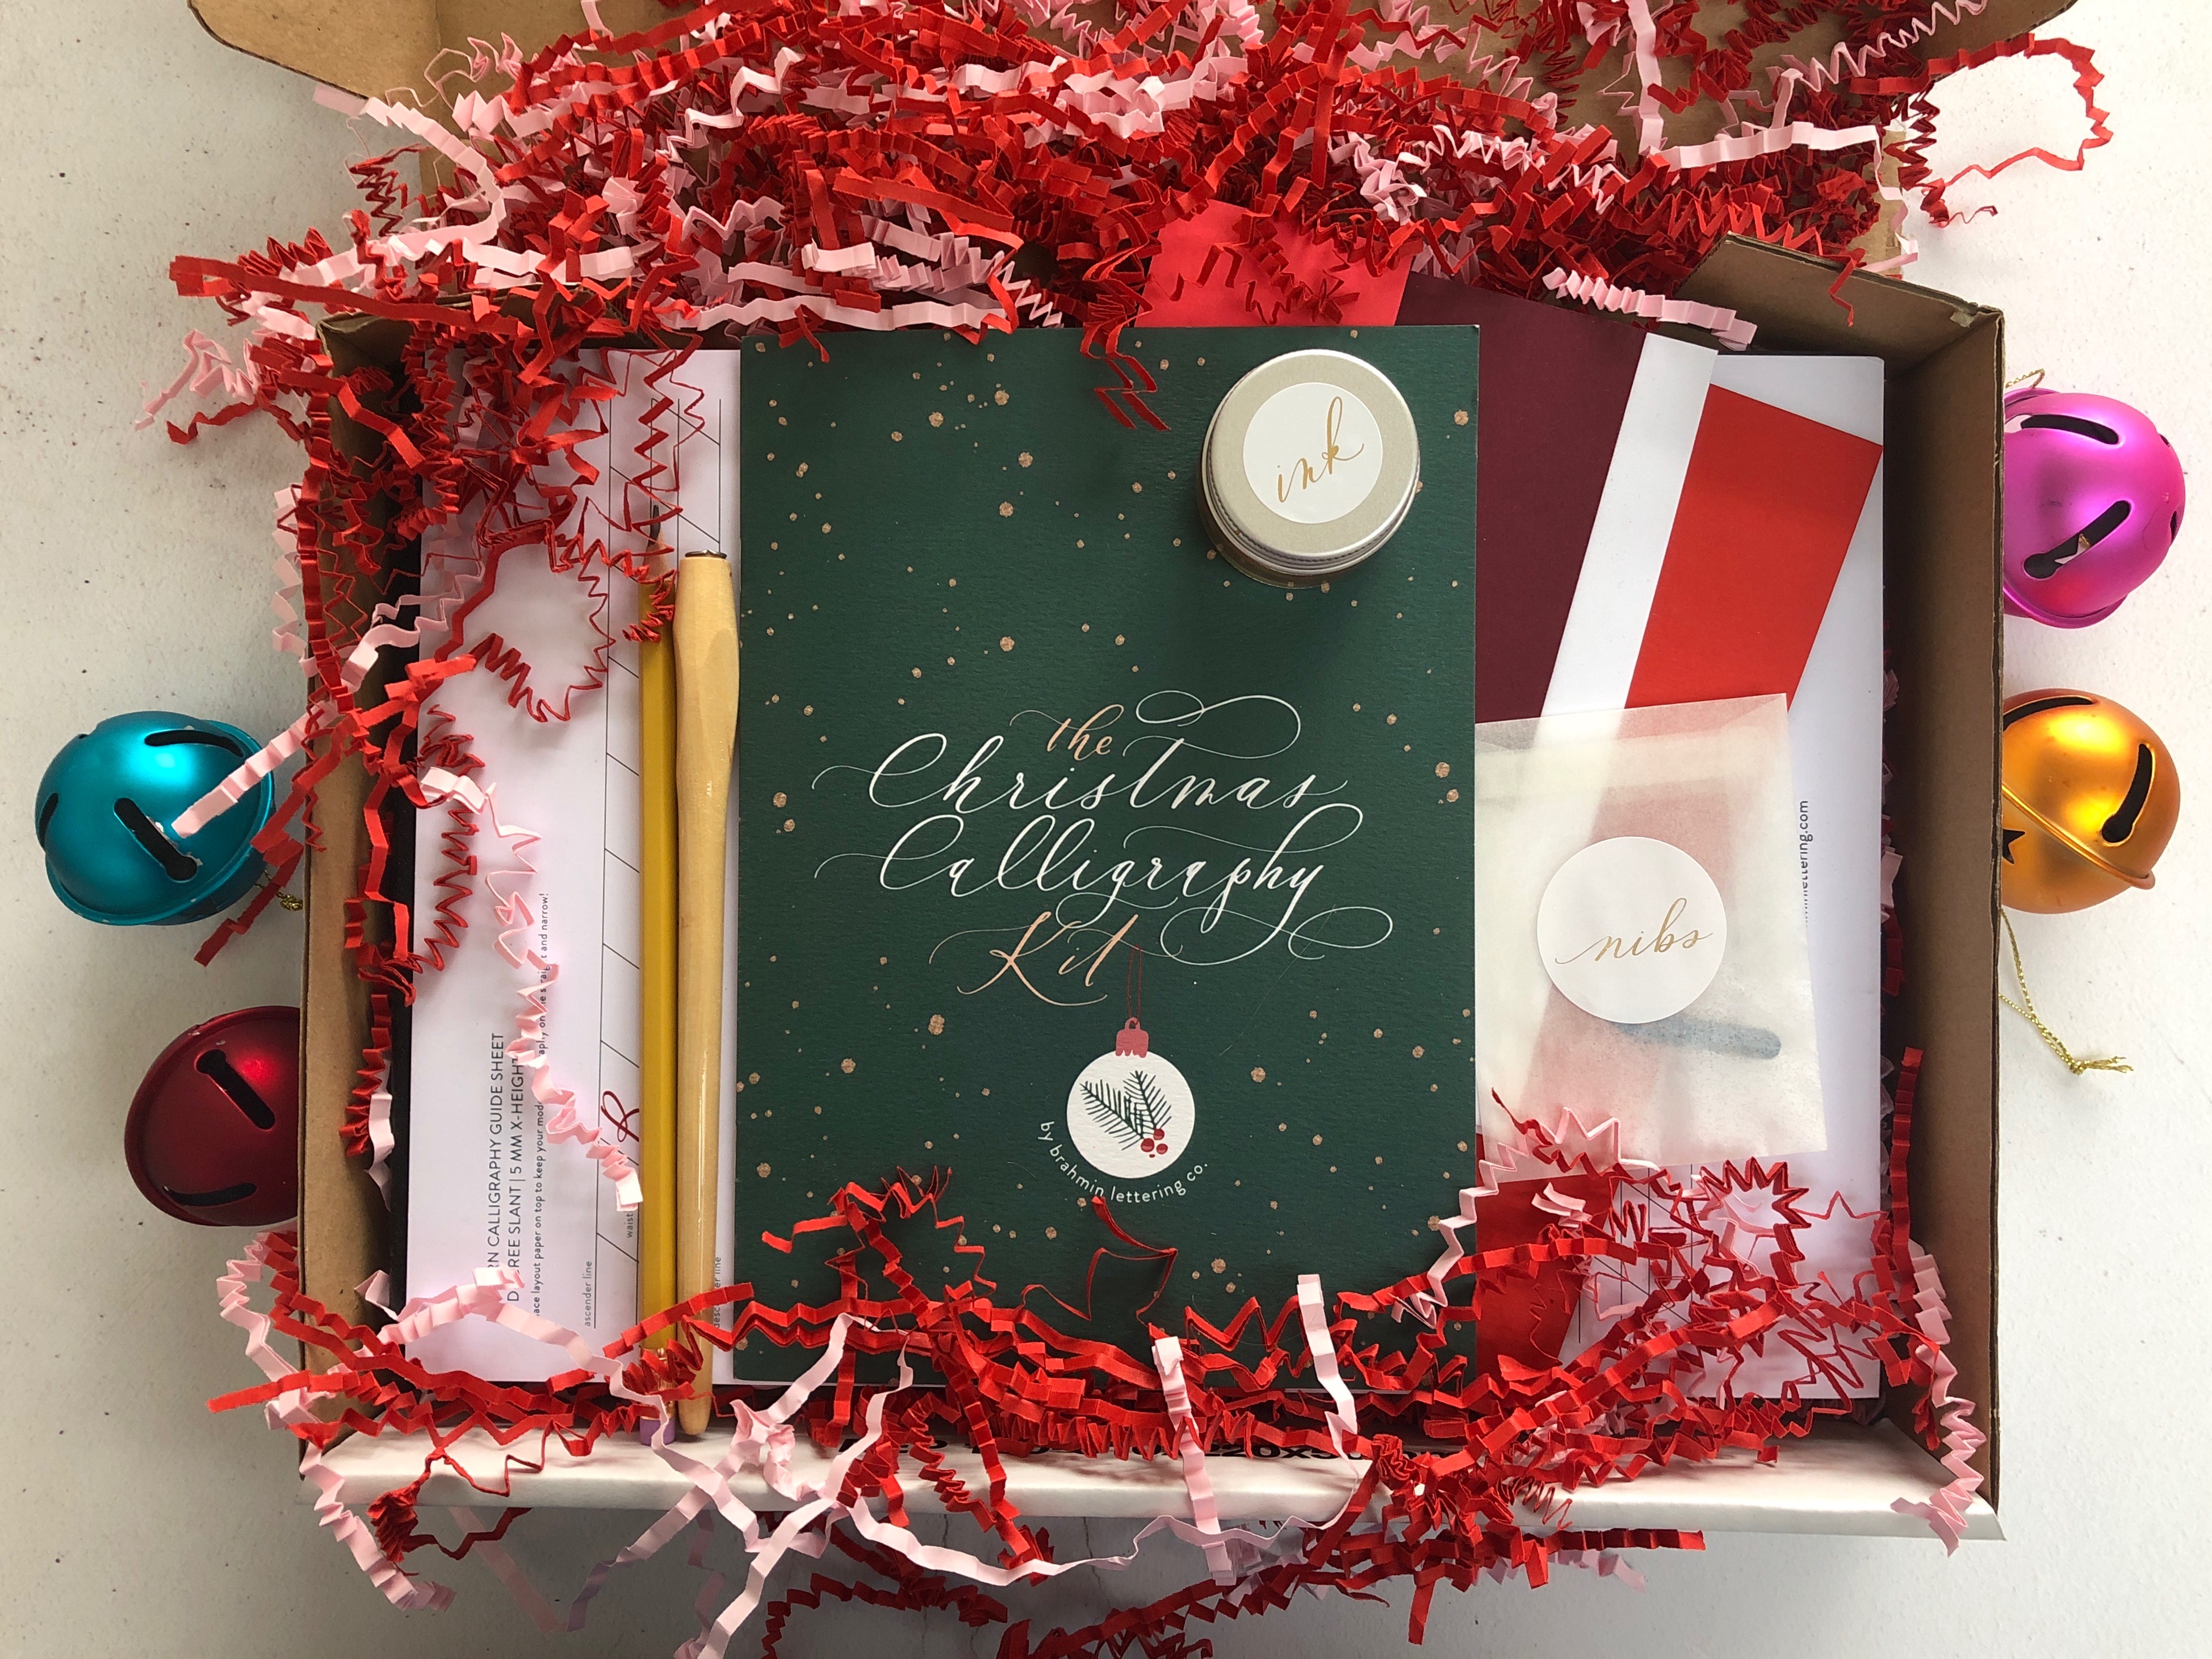 Caitlin's Christmas calligraphy kits have made popular gifts. 